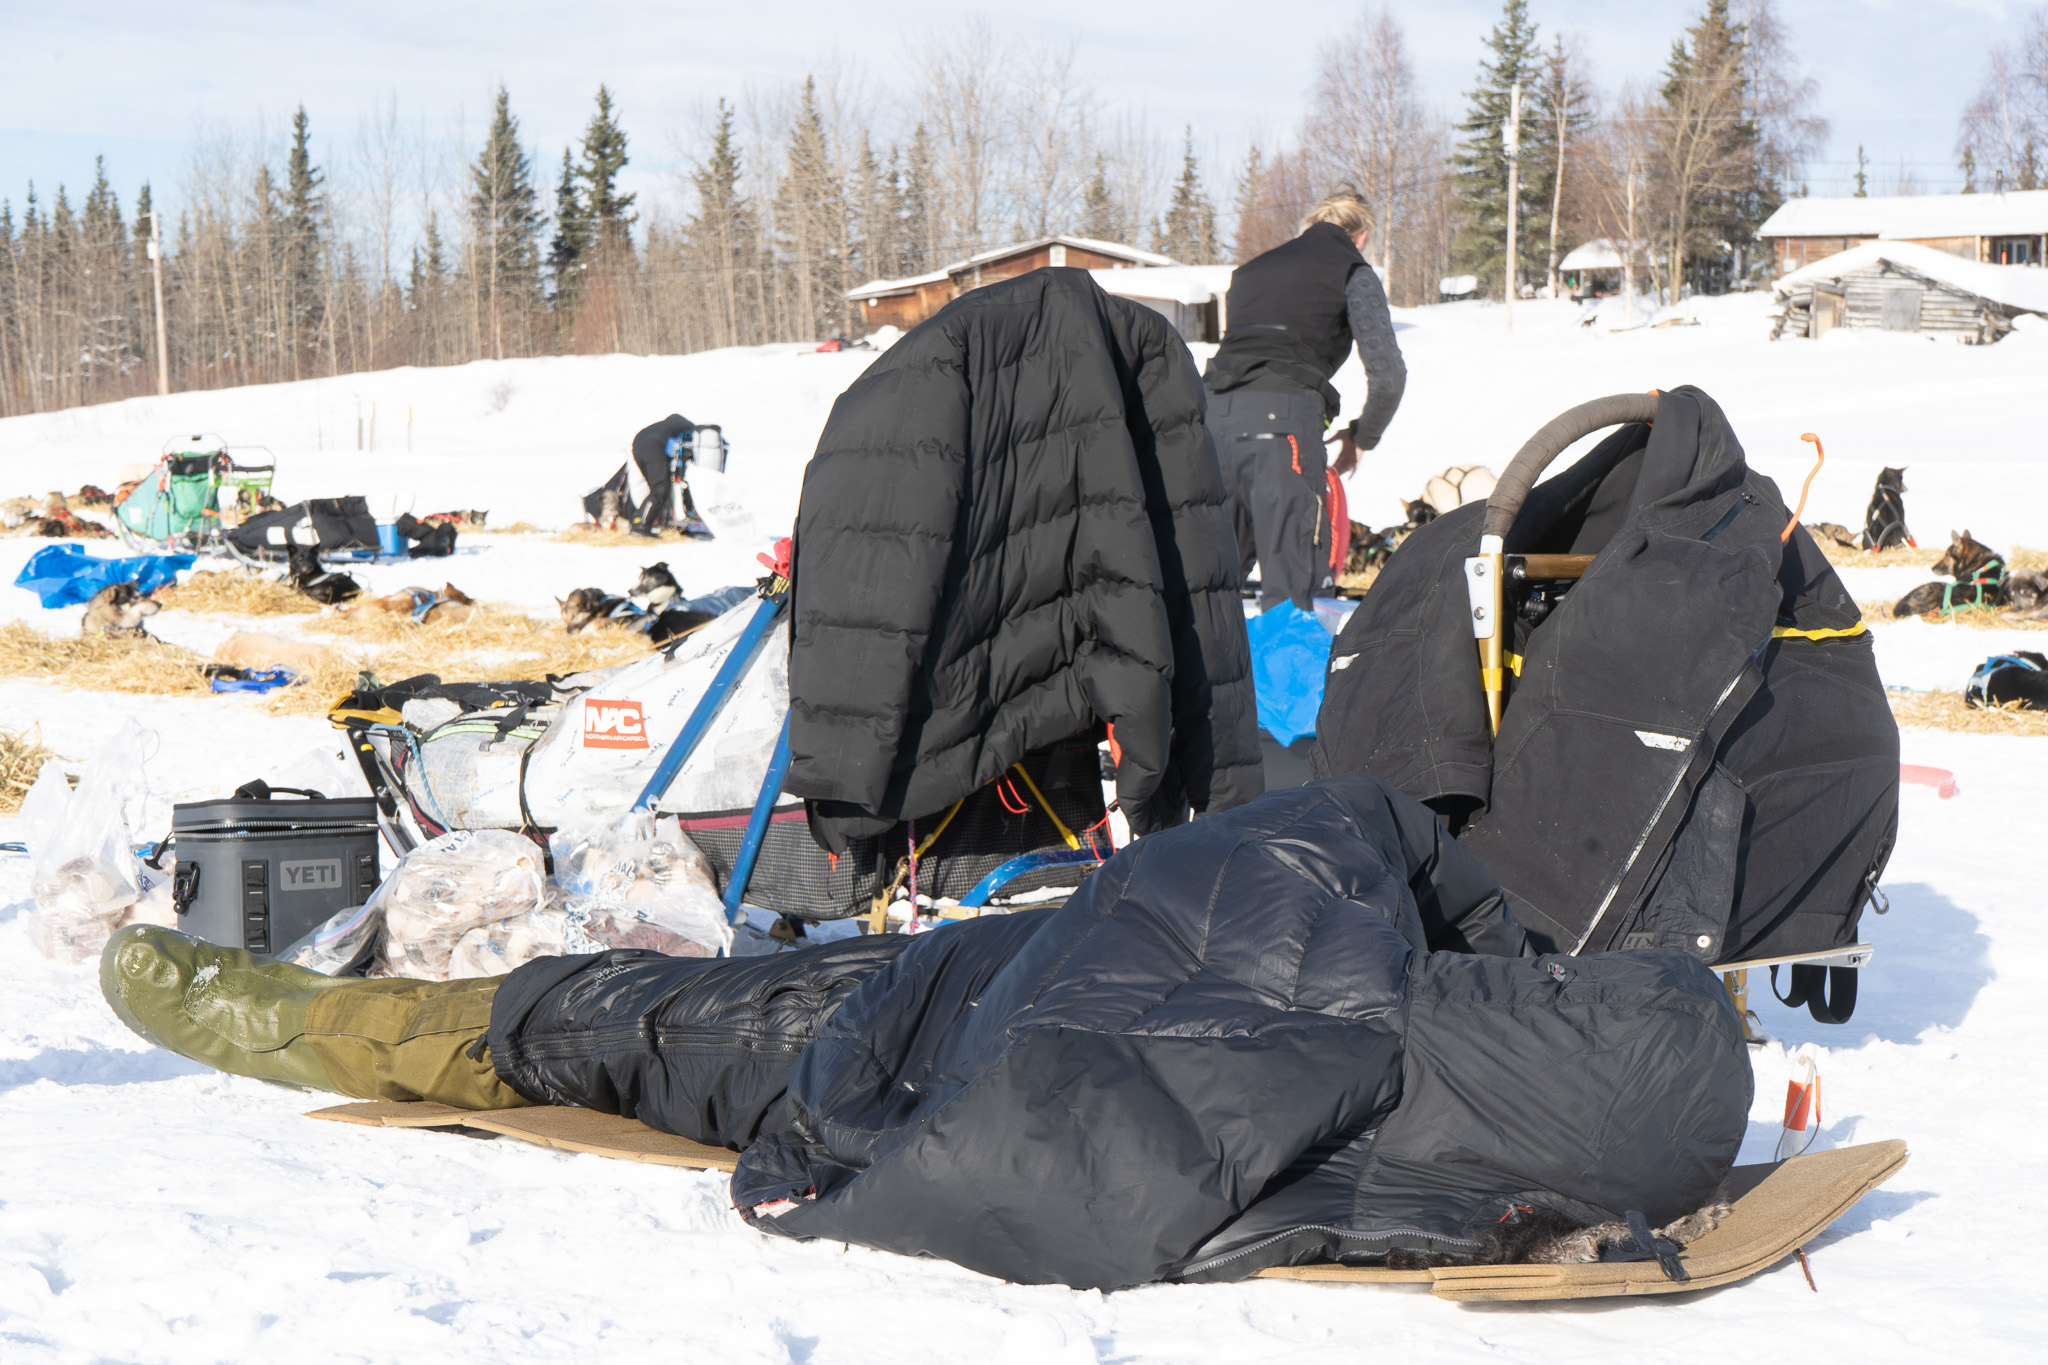 A person lies on a camping mat next to a dog sled